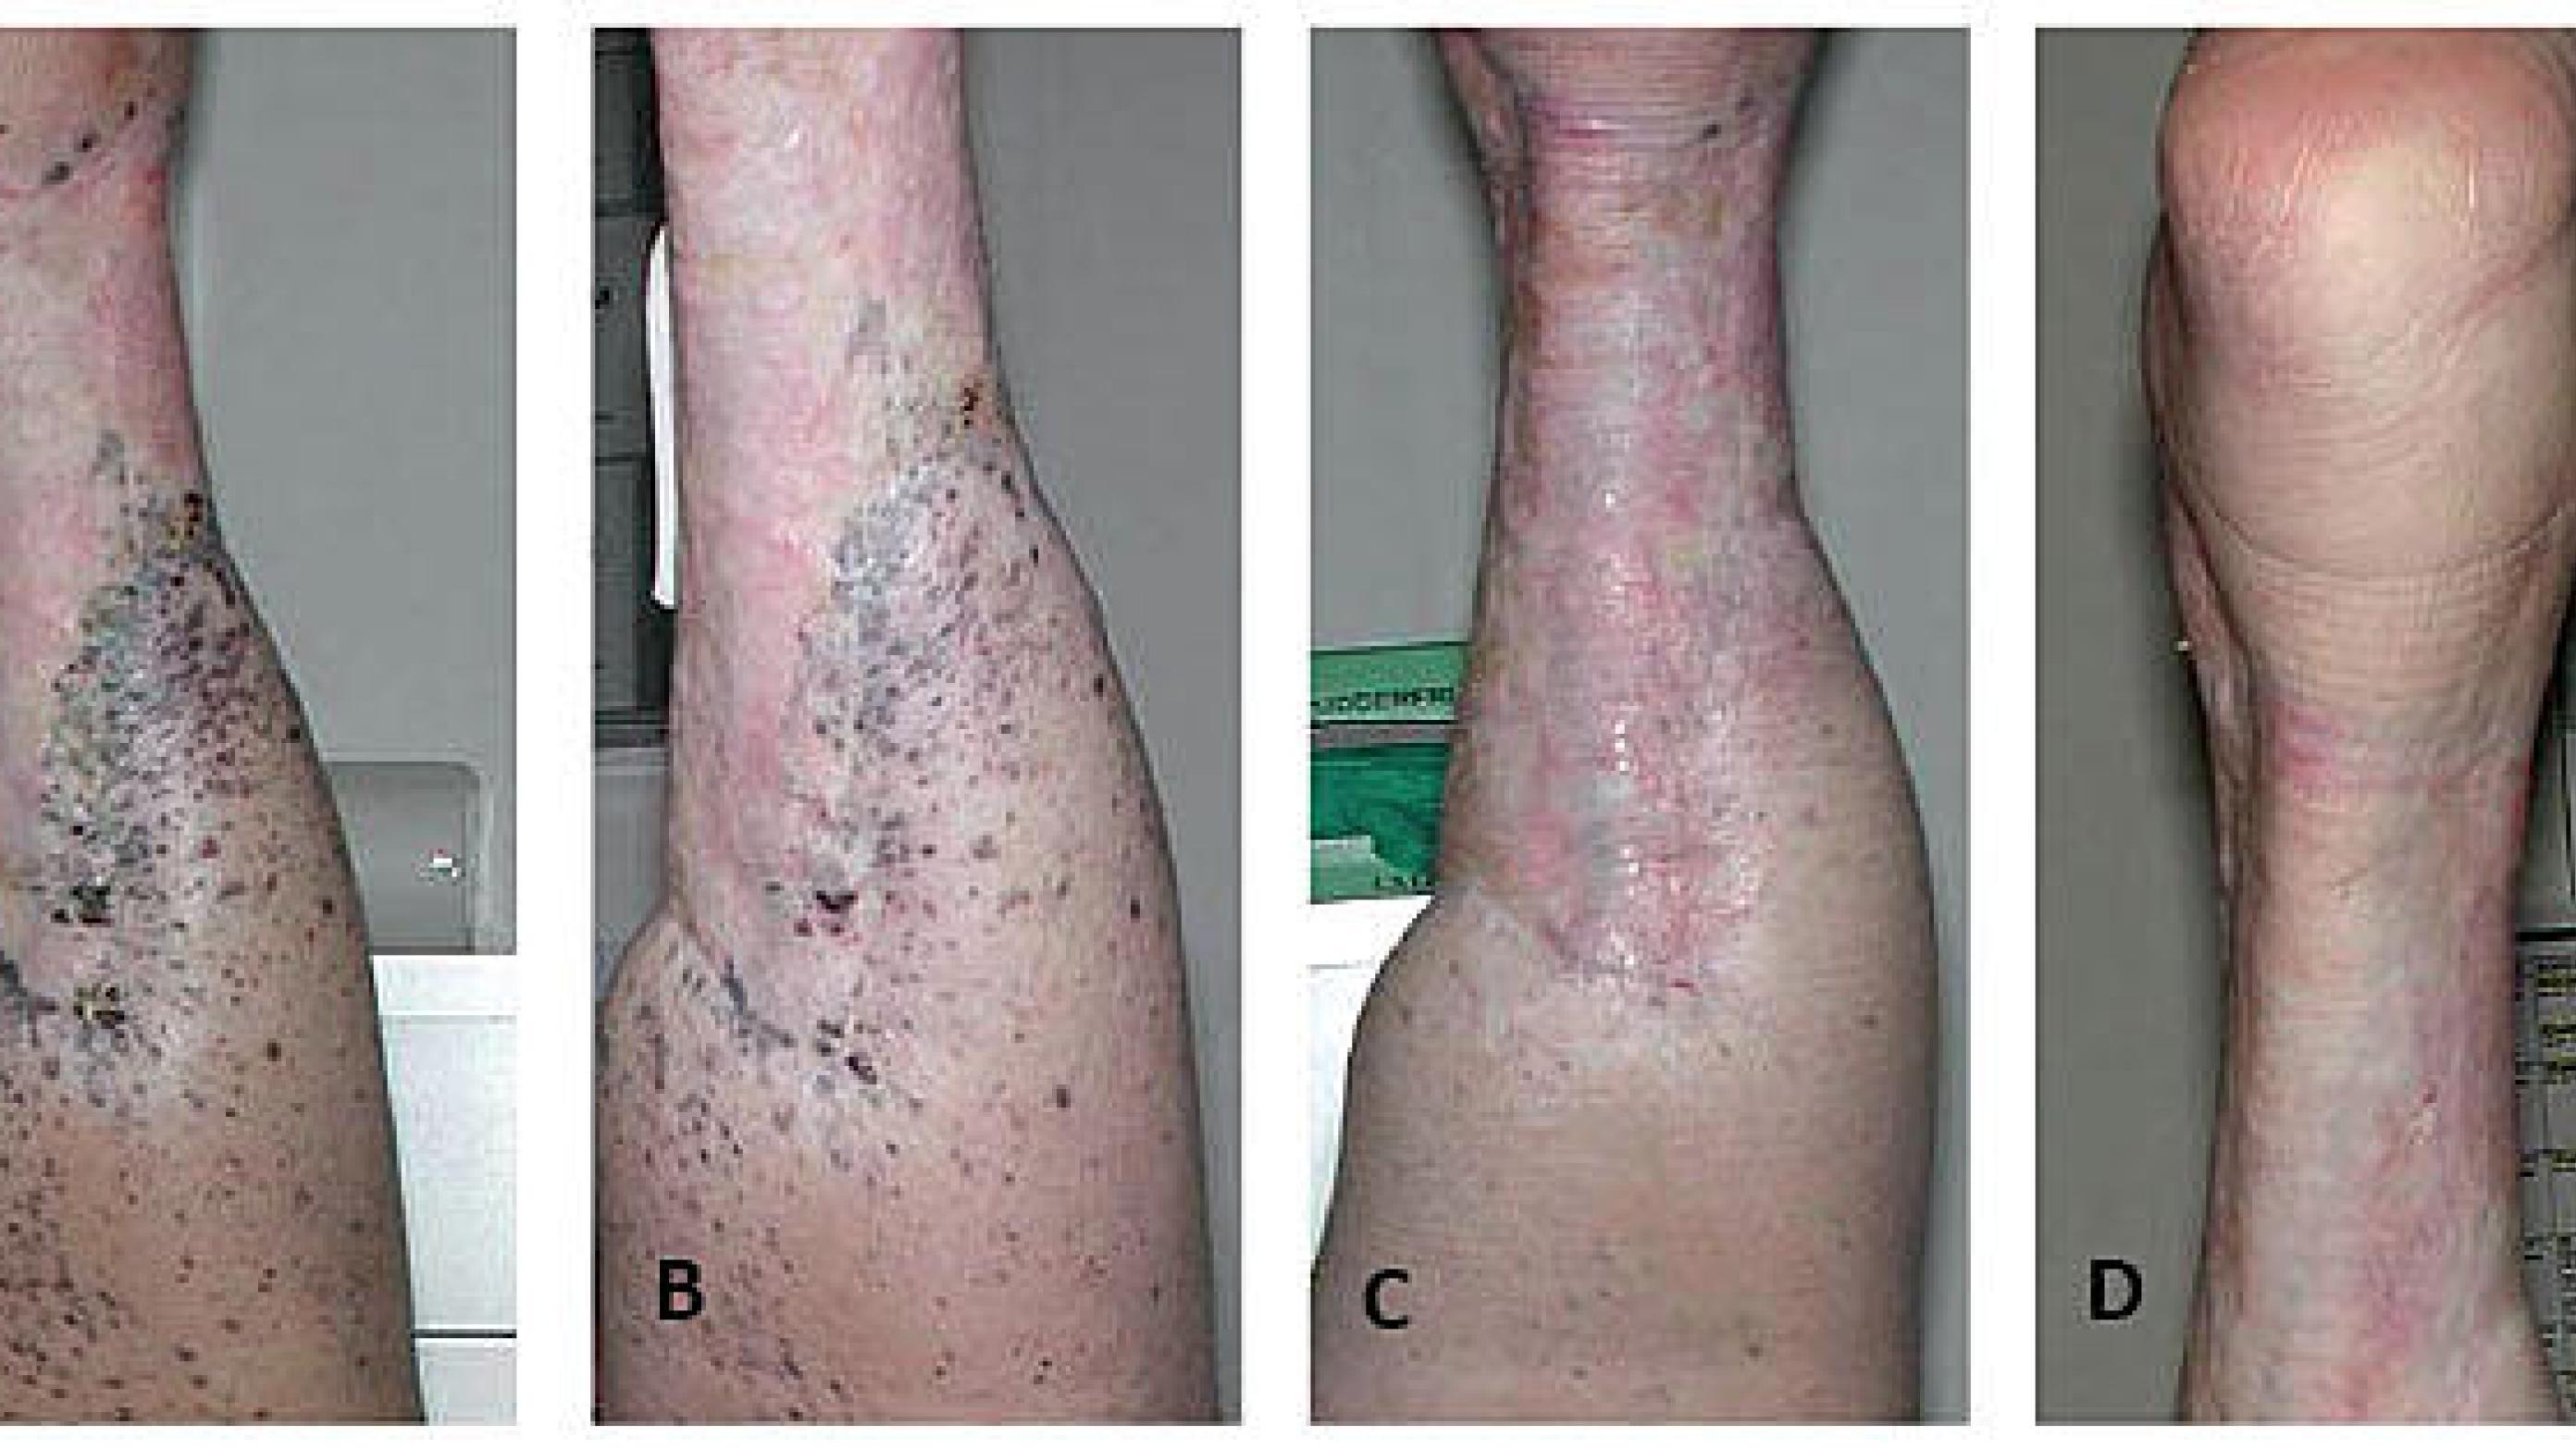 Two and a half years after isolated limb perfusion (ILP), no metastases were visible in the perfused limb.